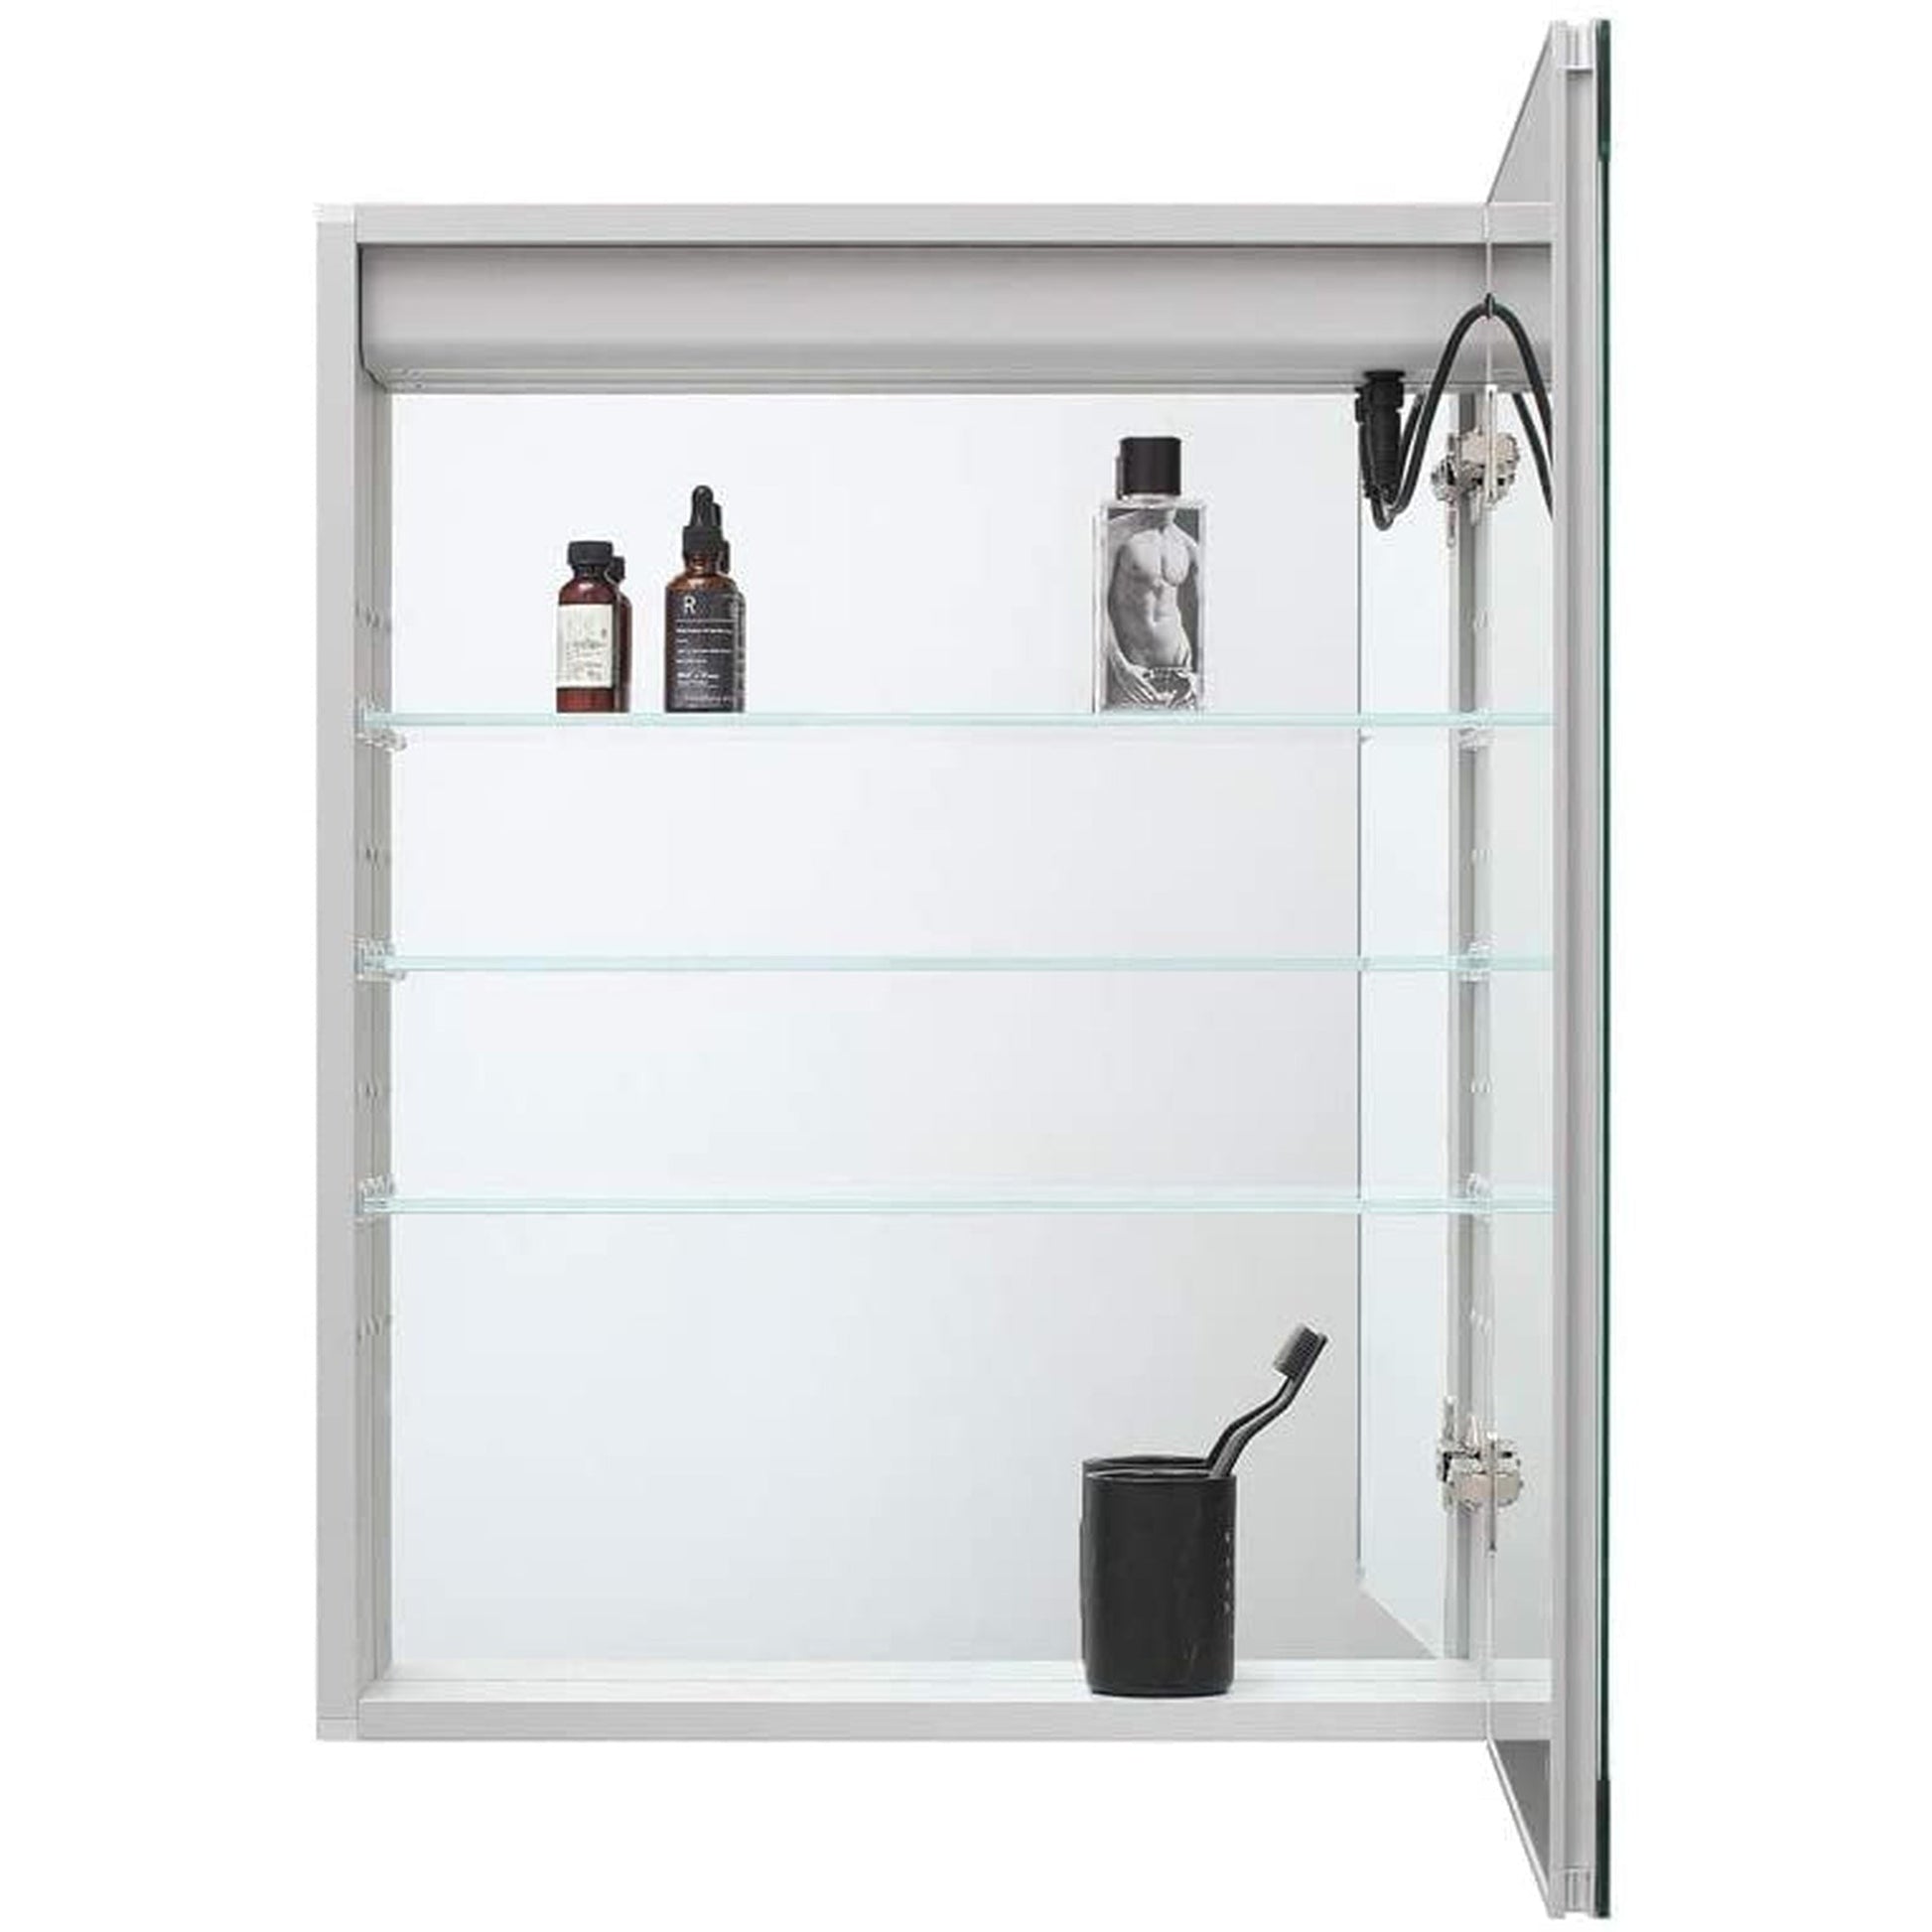 Aquadom Pacifica 20" x 26" Rectangular Recessed or Surface Mount Single View LED Lighted Right-Hinged Bathroom Medicine Cabinet With Defogger And Electrical Outlet